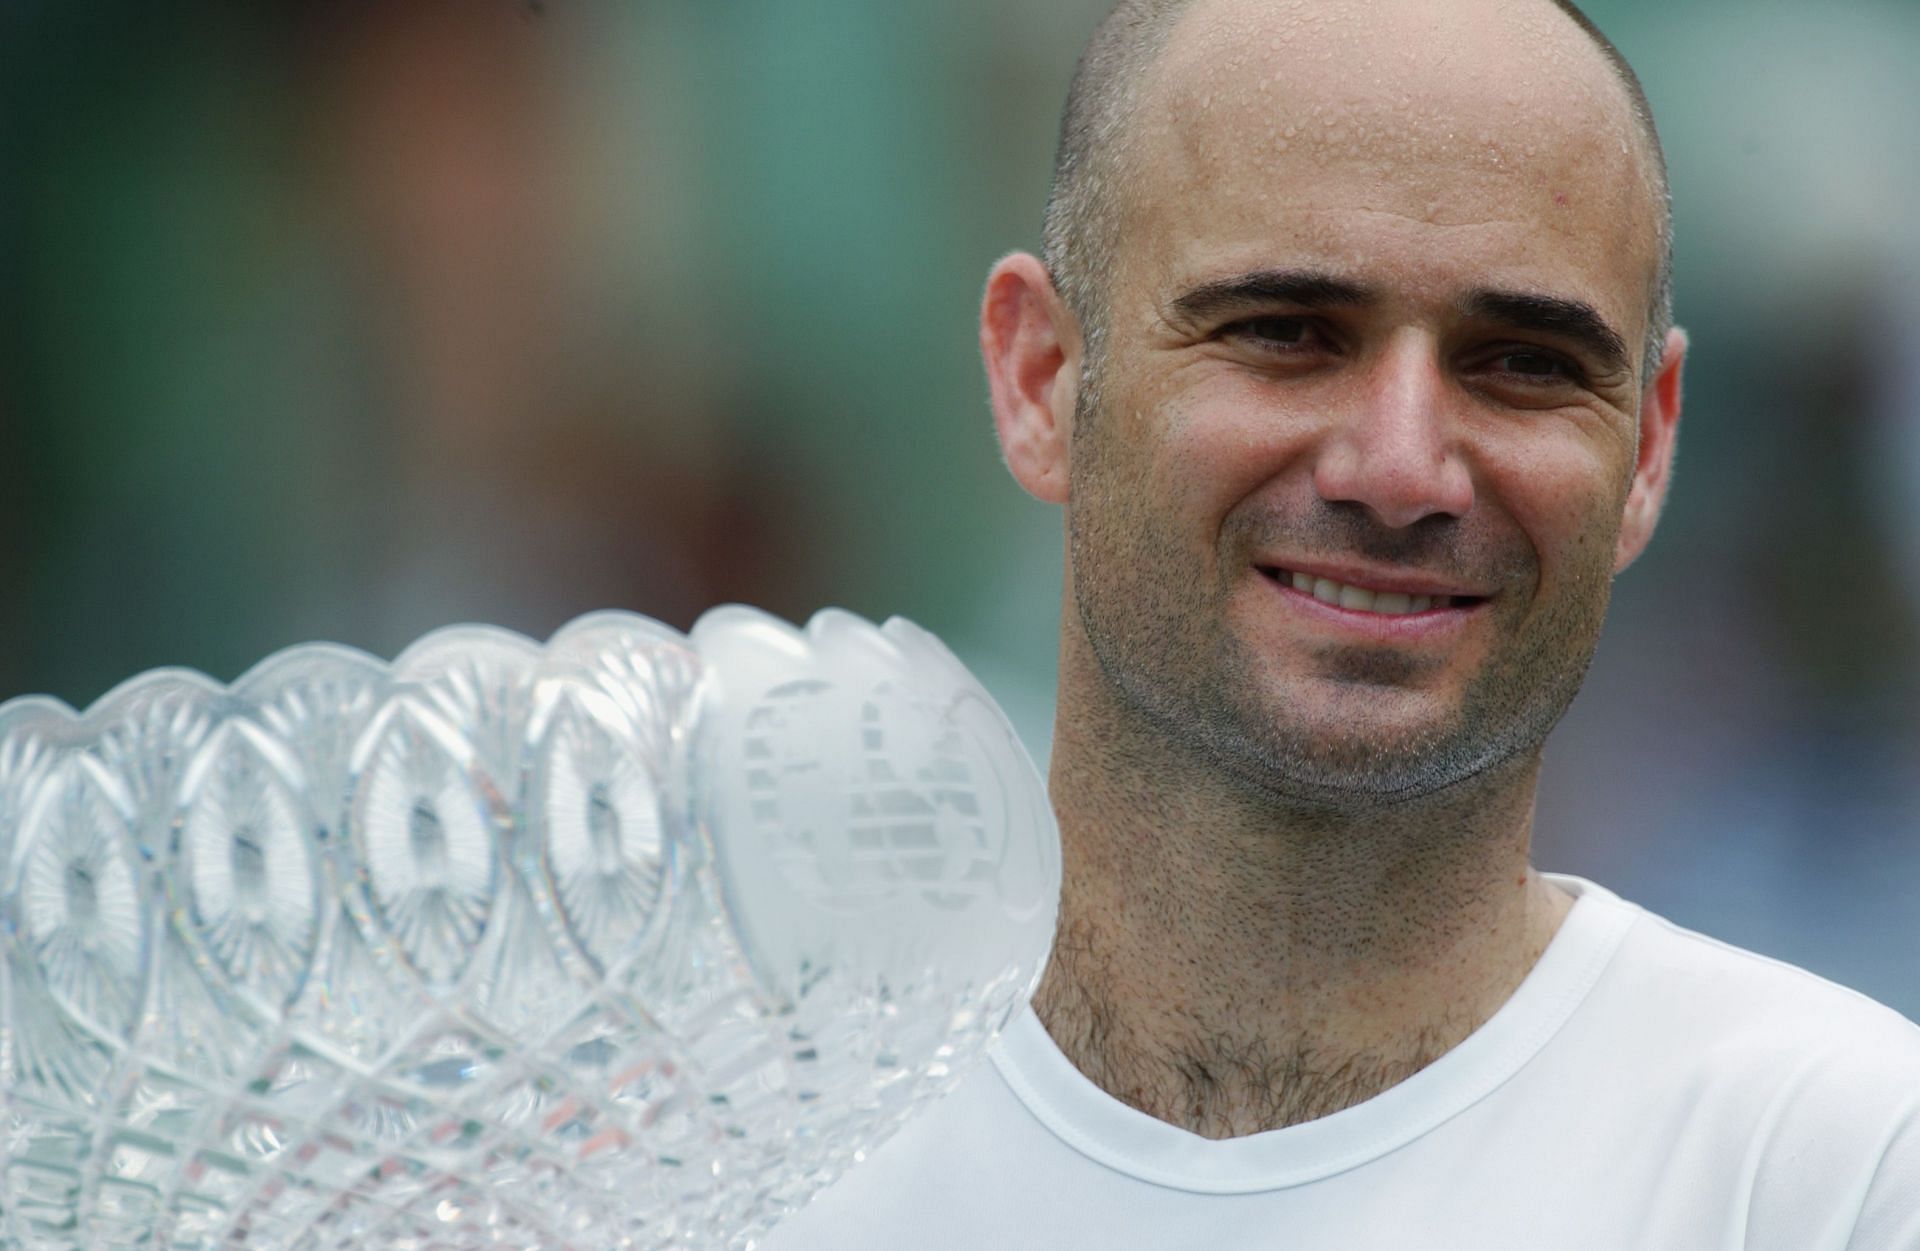 Agassi with his 2003 Miami Masters trophy